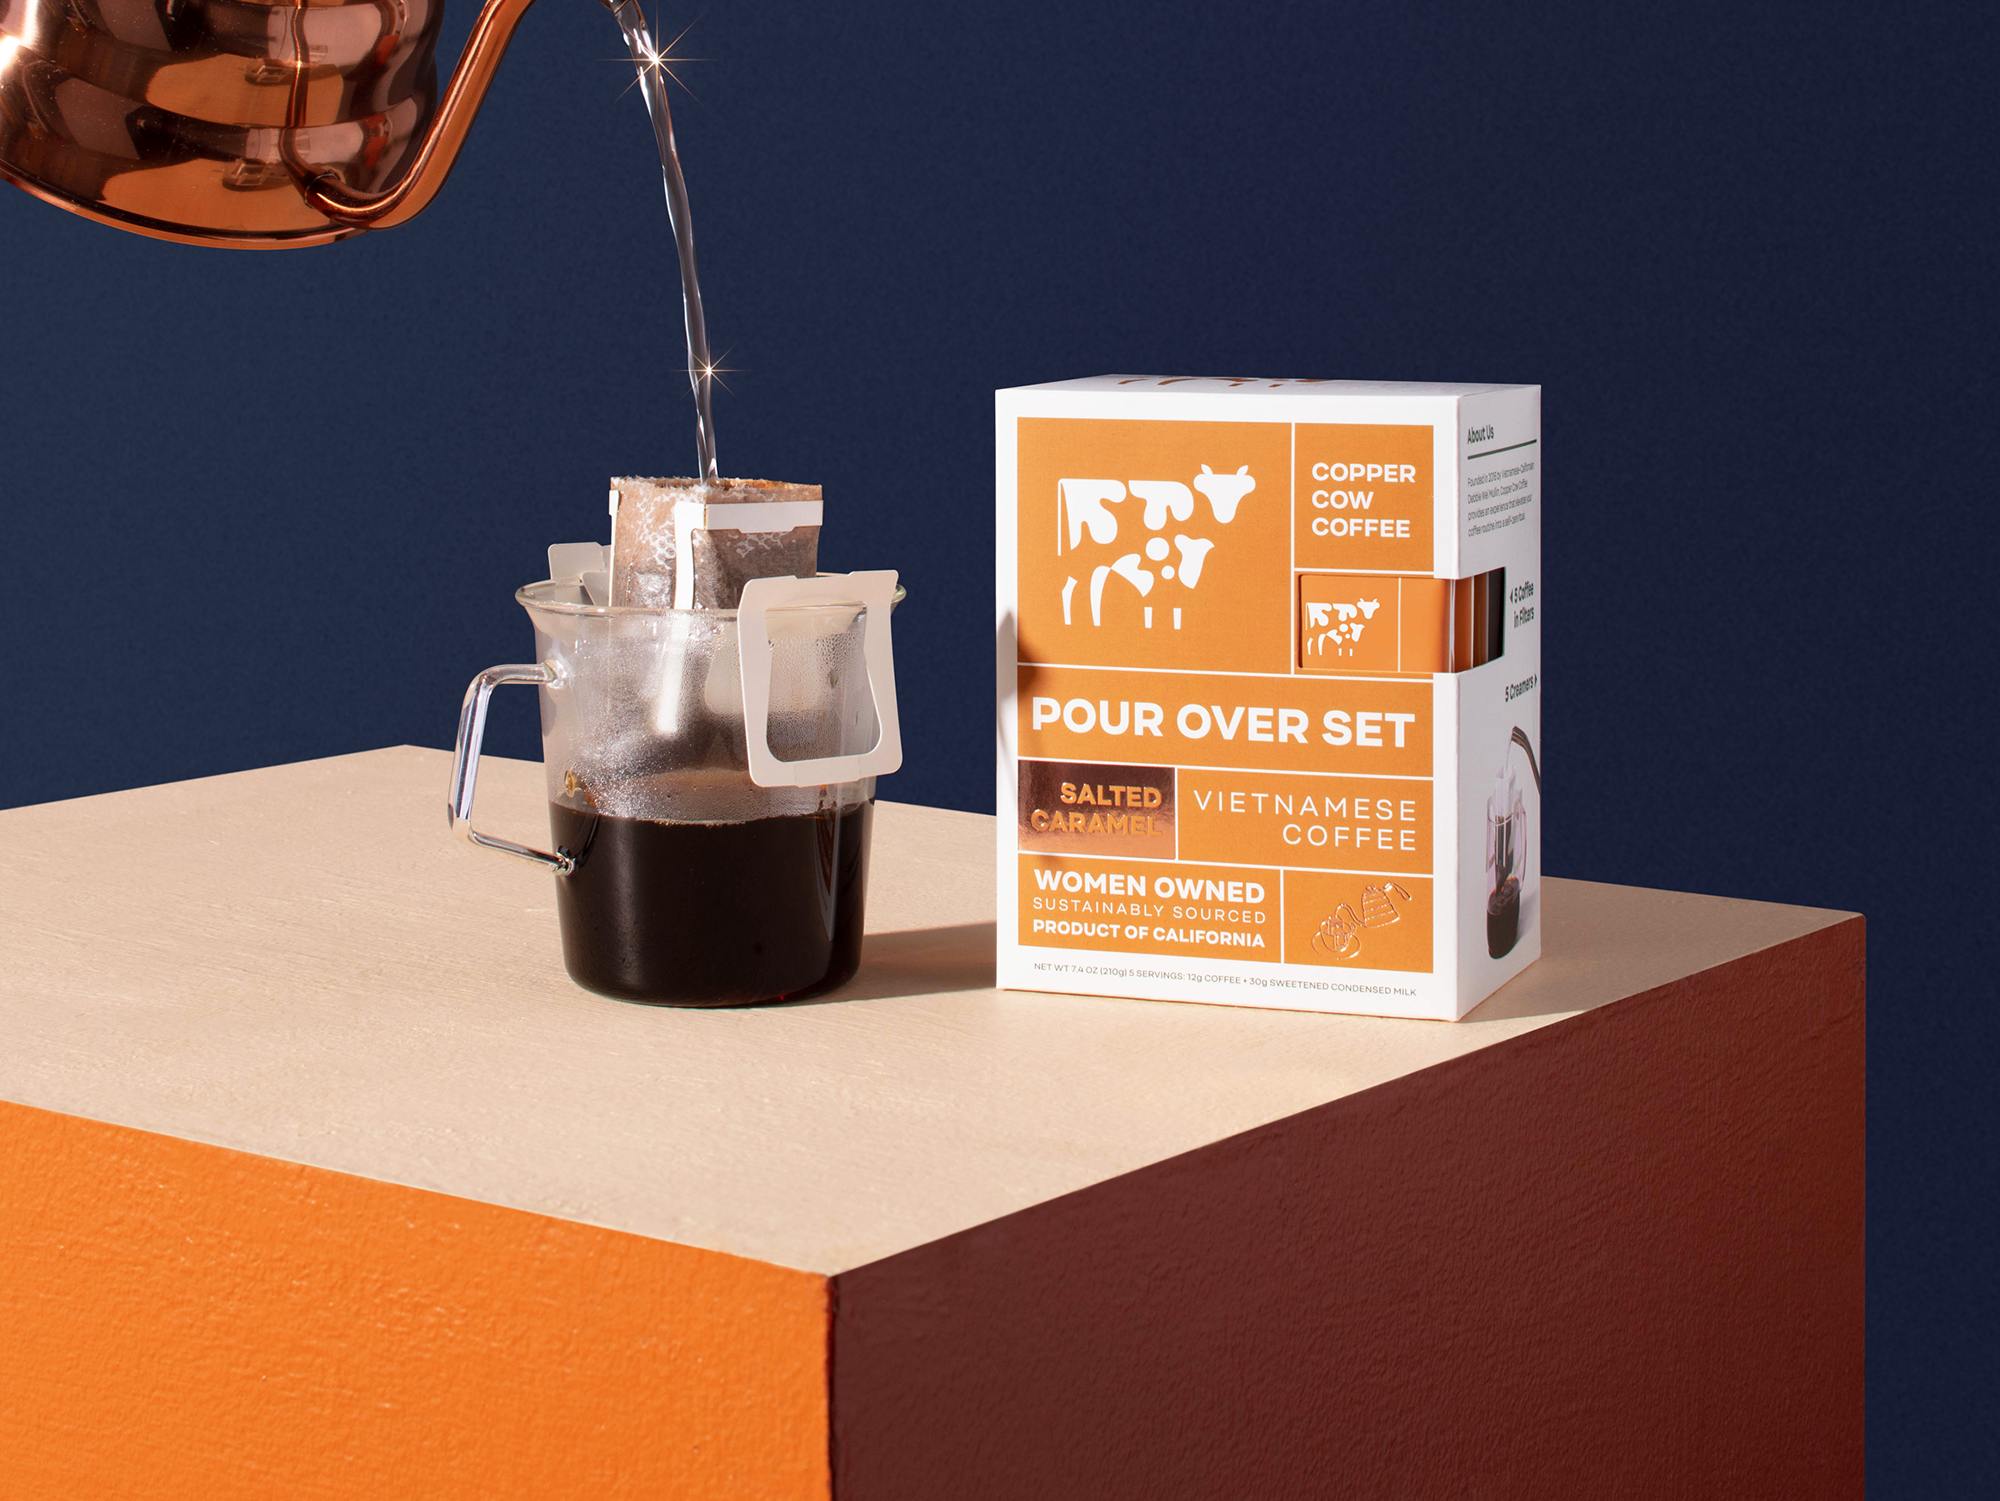 Move Over, Nespresso Pods. Copper Cow Coffee Scales Up Pour-Over Vietnamese Coffee